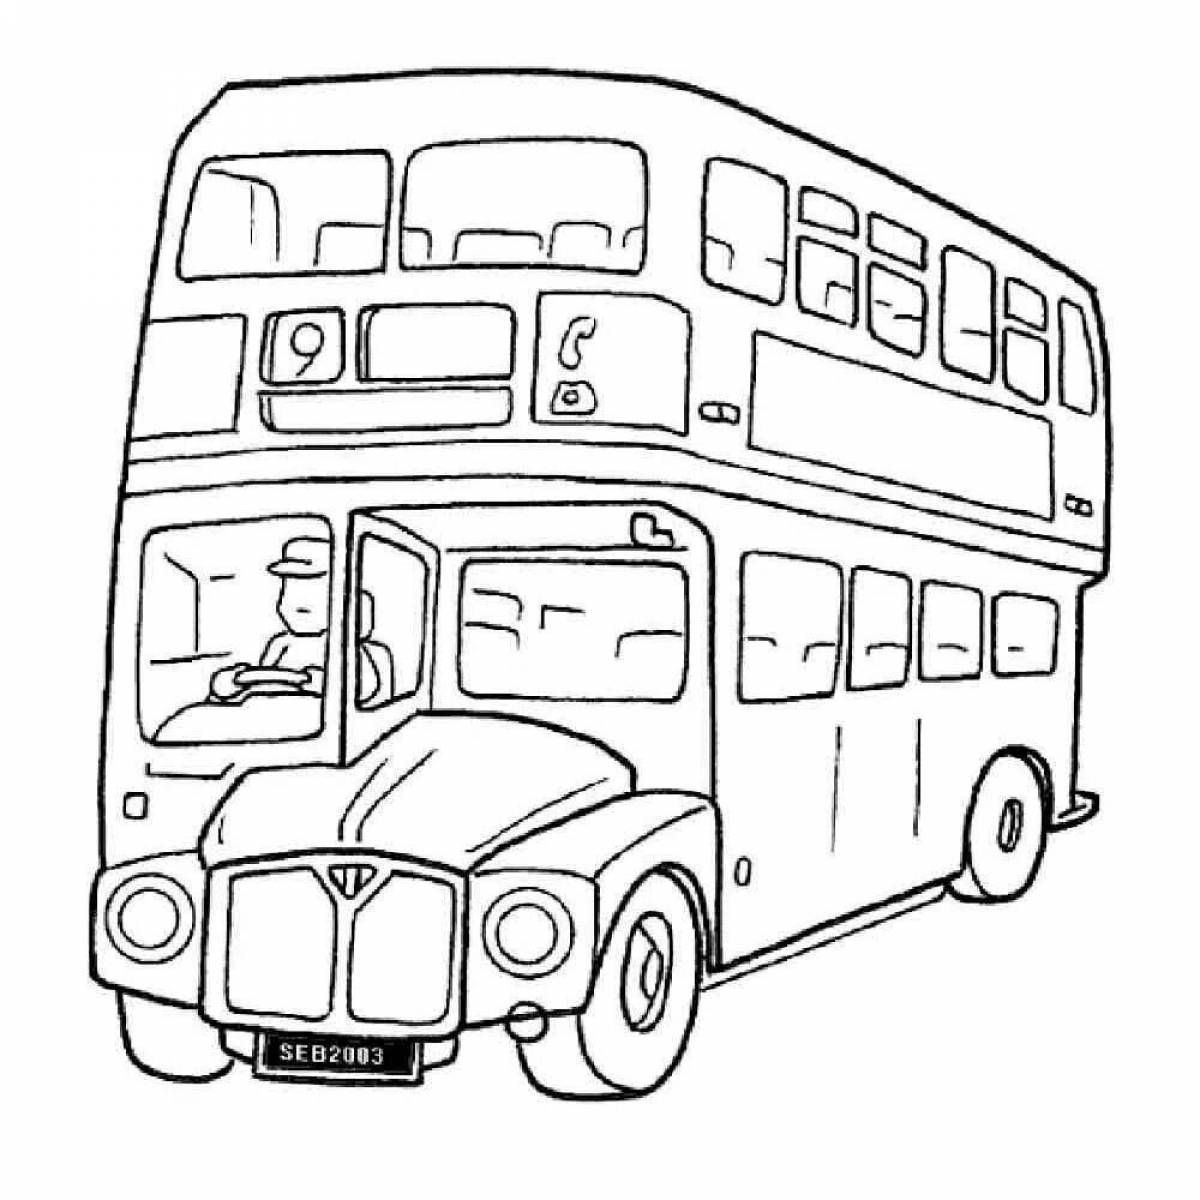 Fabulous cars and buses coloring page